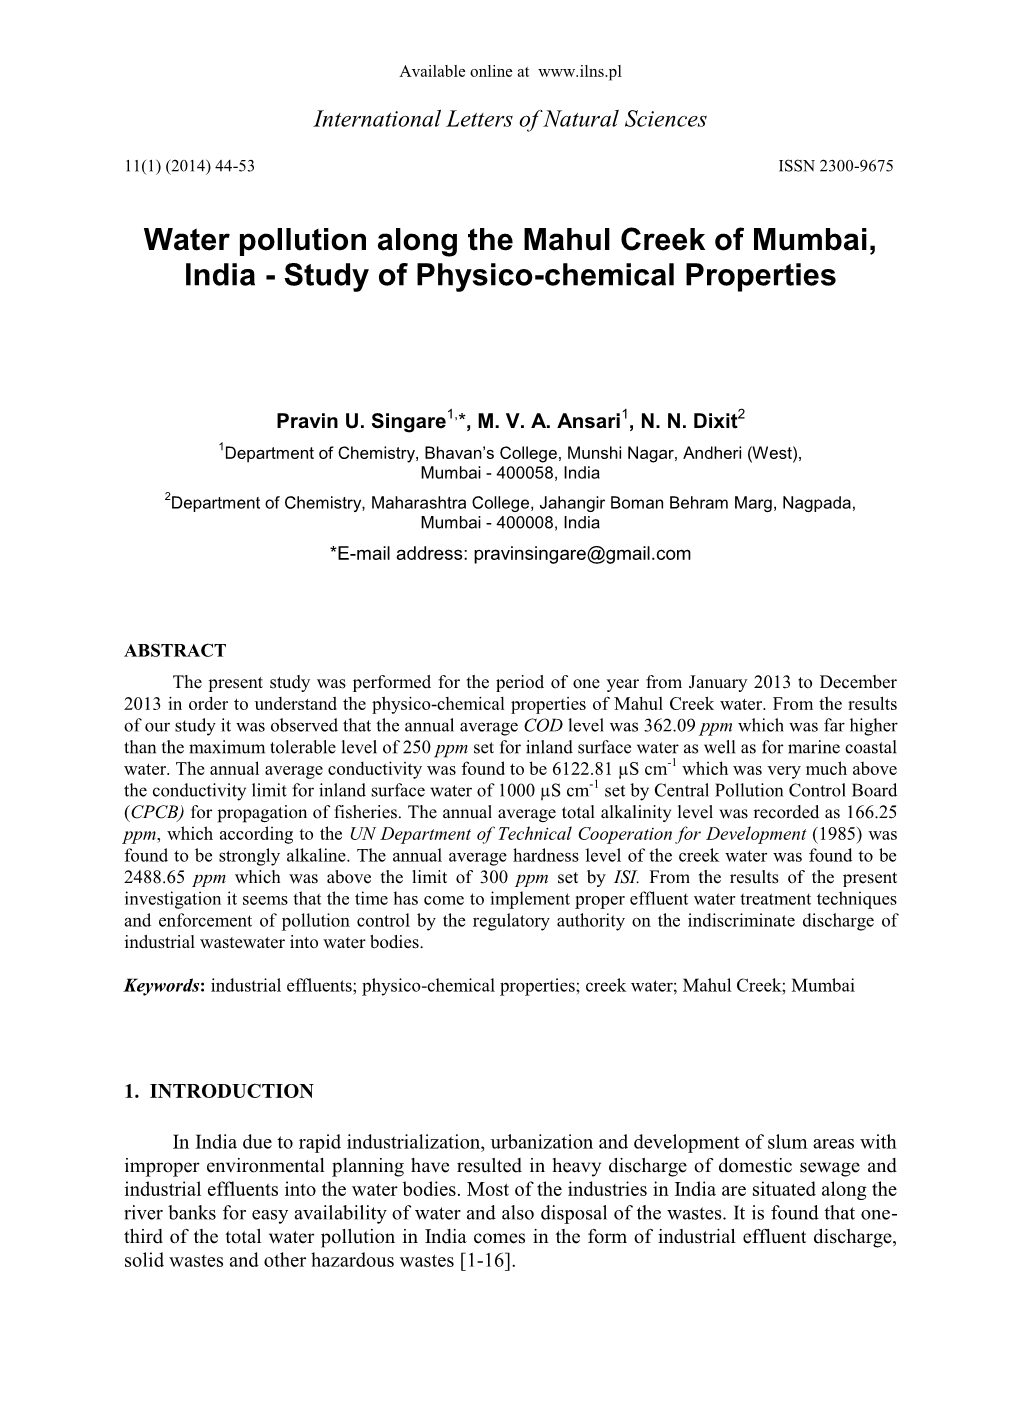 Water Pollution Along the Mahul Creek of Mumbai, India - Study of Physico-Chemical Properties